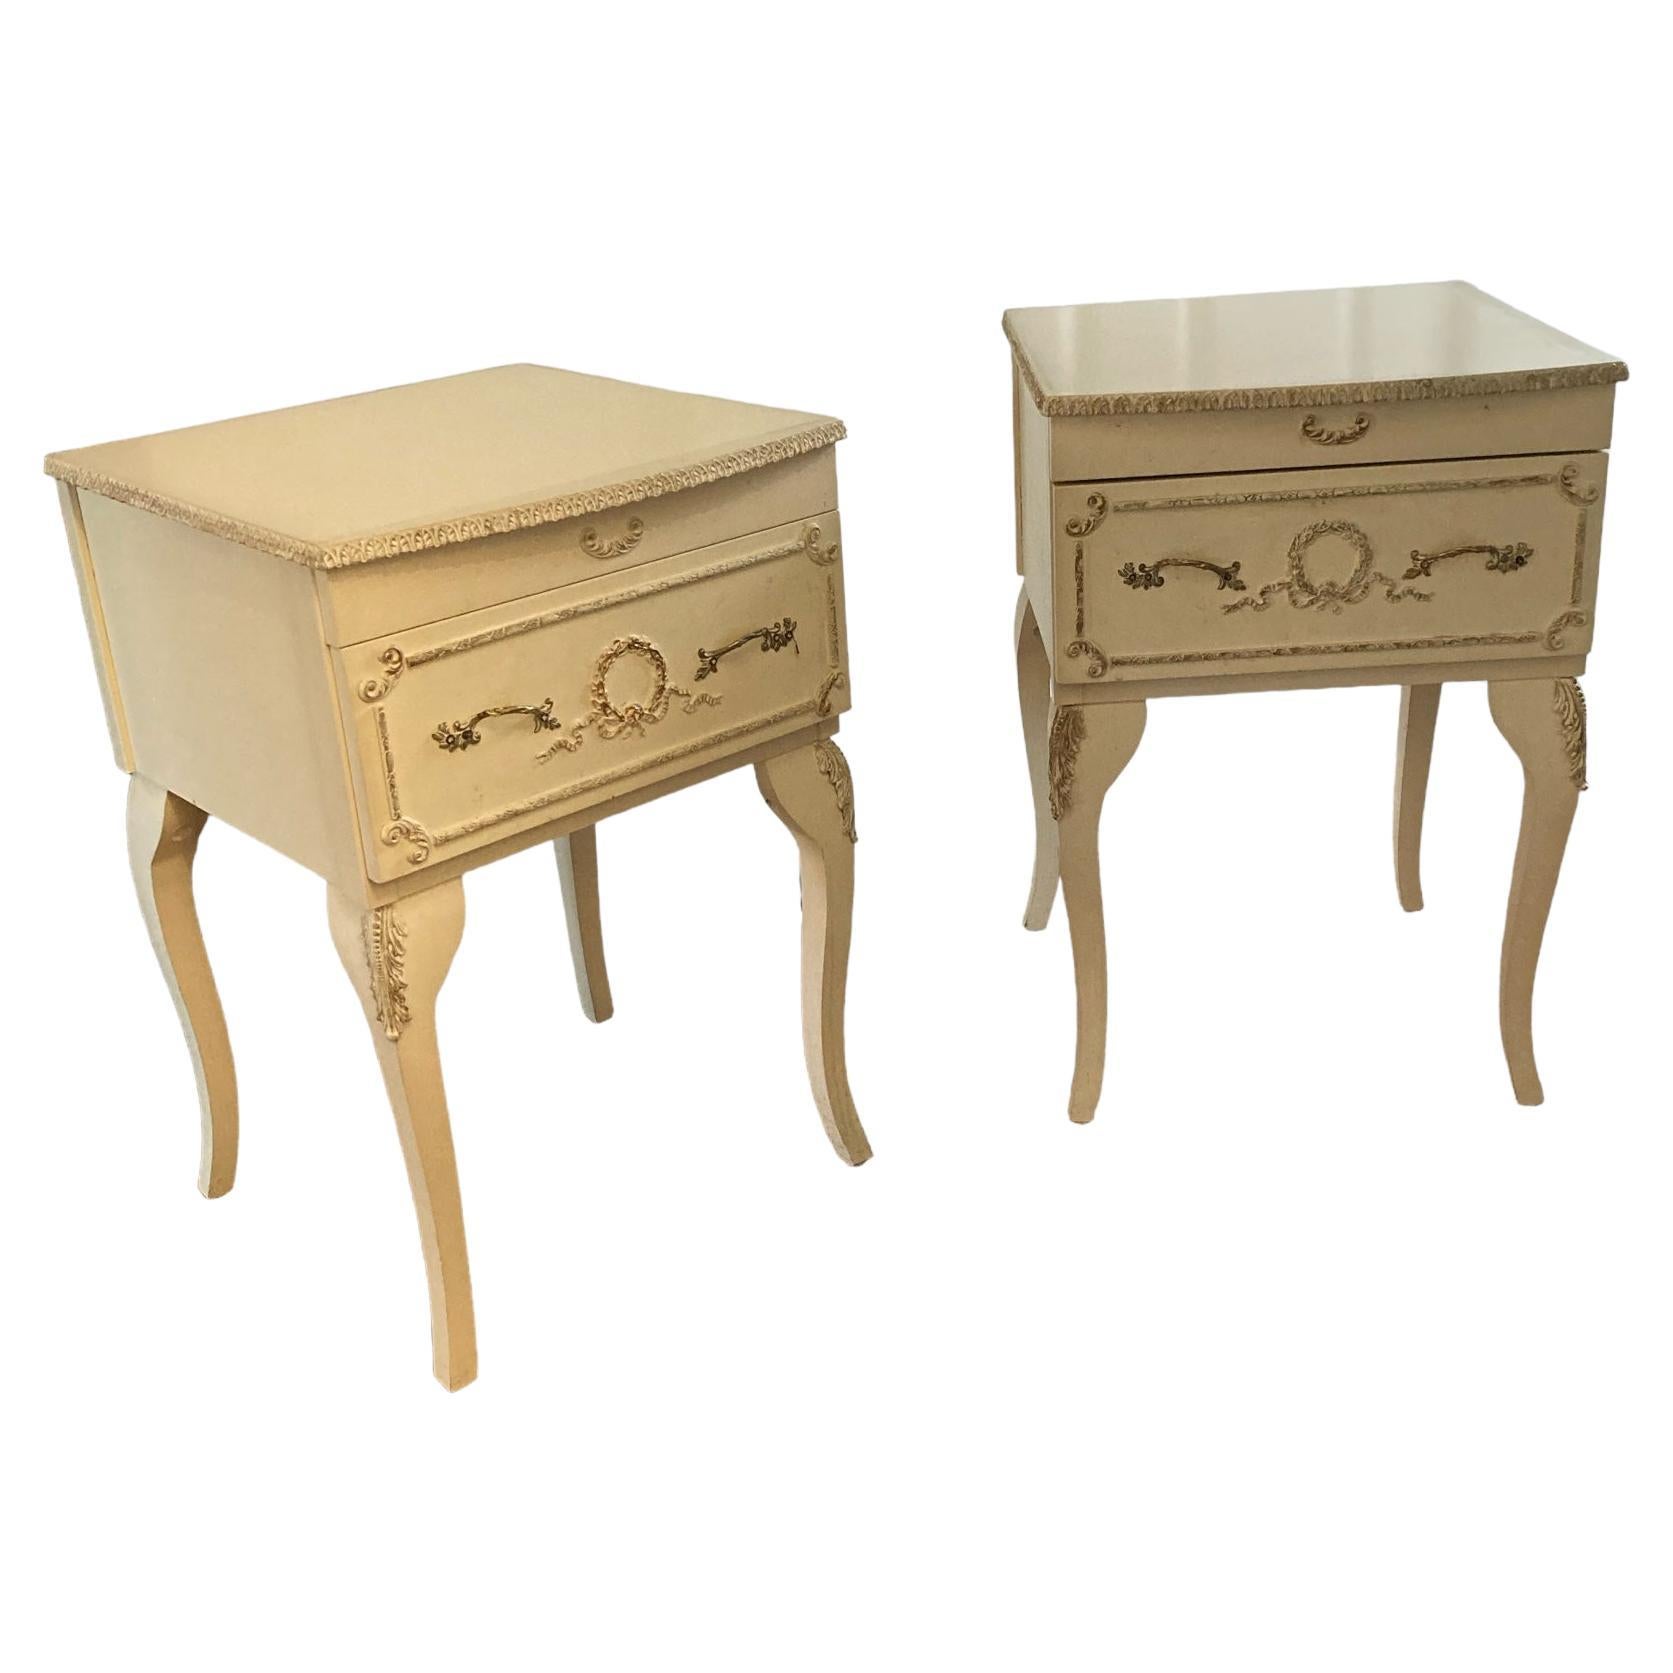 Vintage Pair Bedside tables or Nightstands French Antique Style